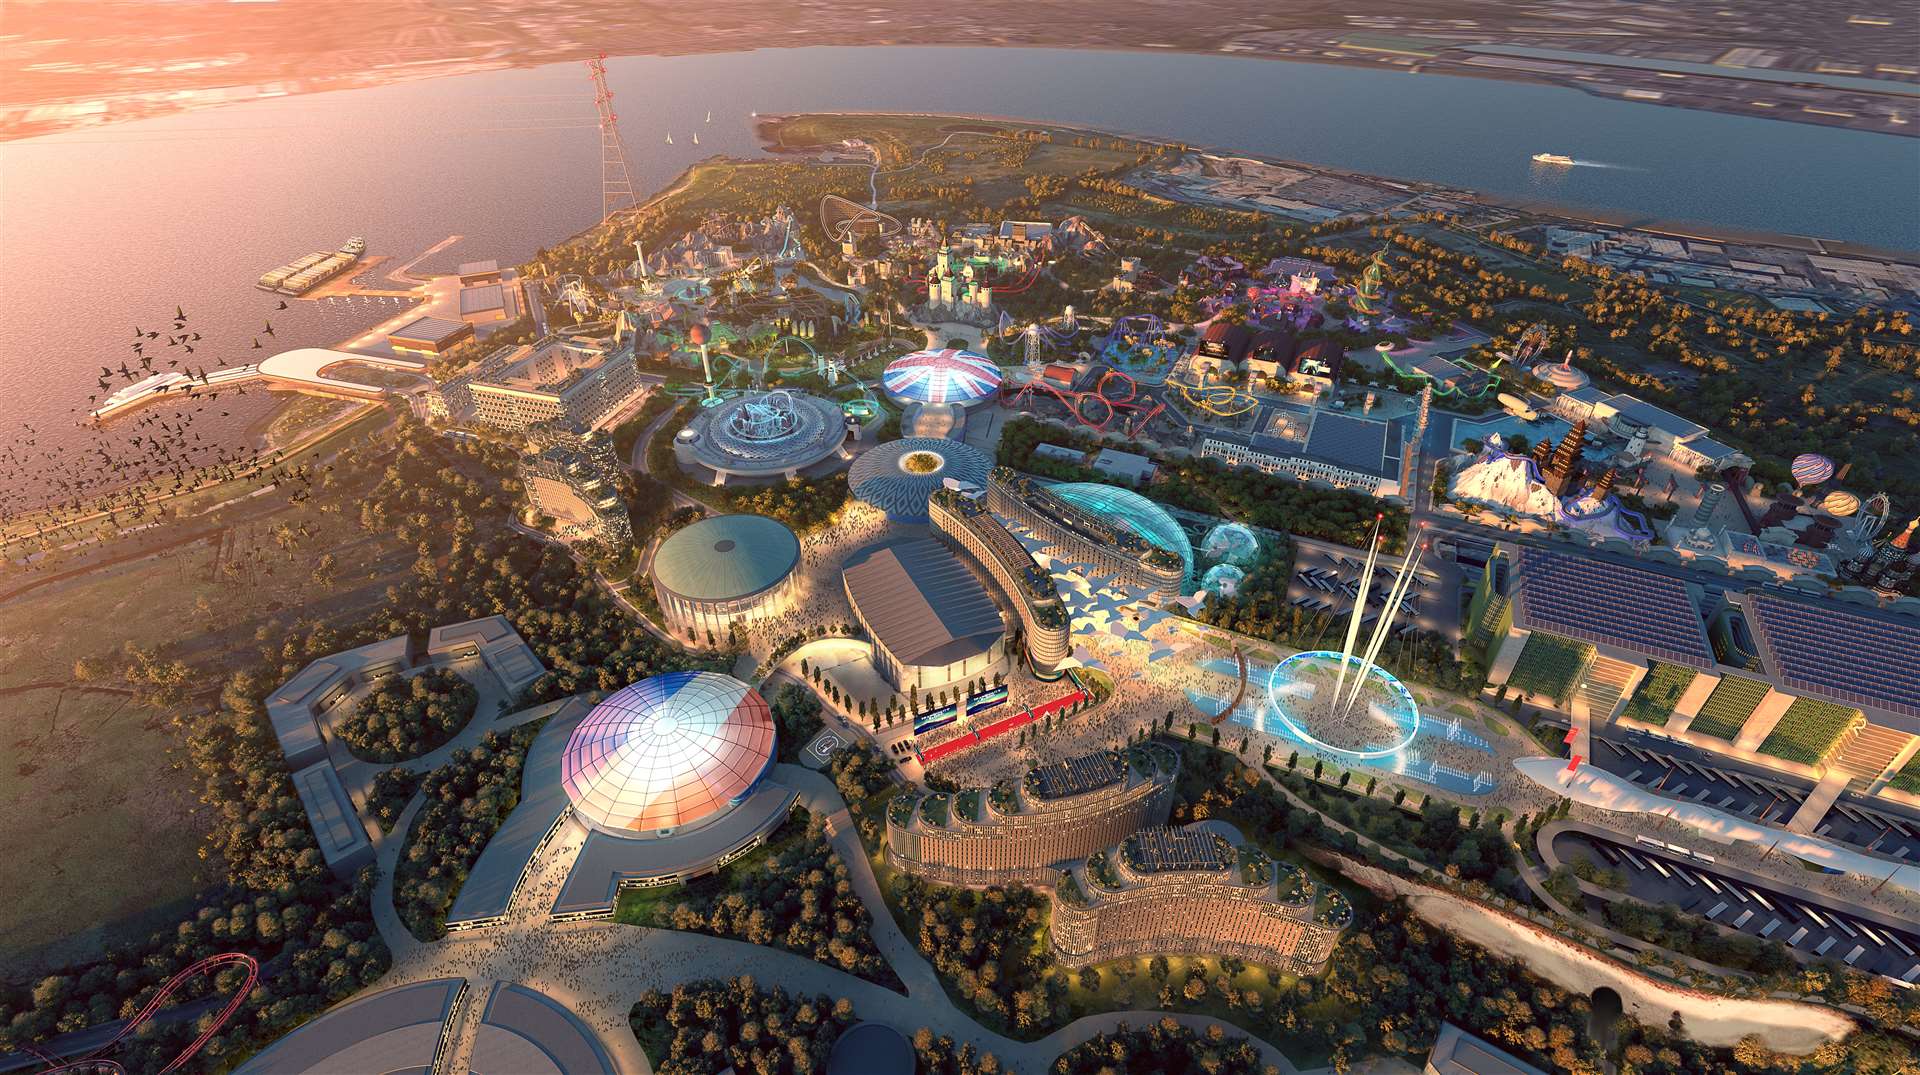 Latest plans released showing how the London Resort theme park would look under the now pulled planning application. Picture: London Resort Company Holdings